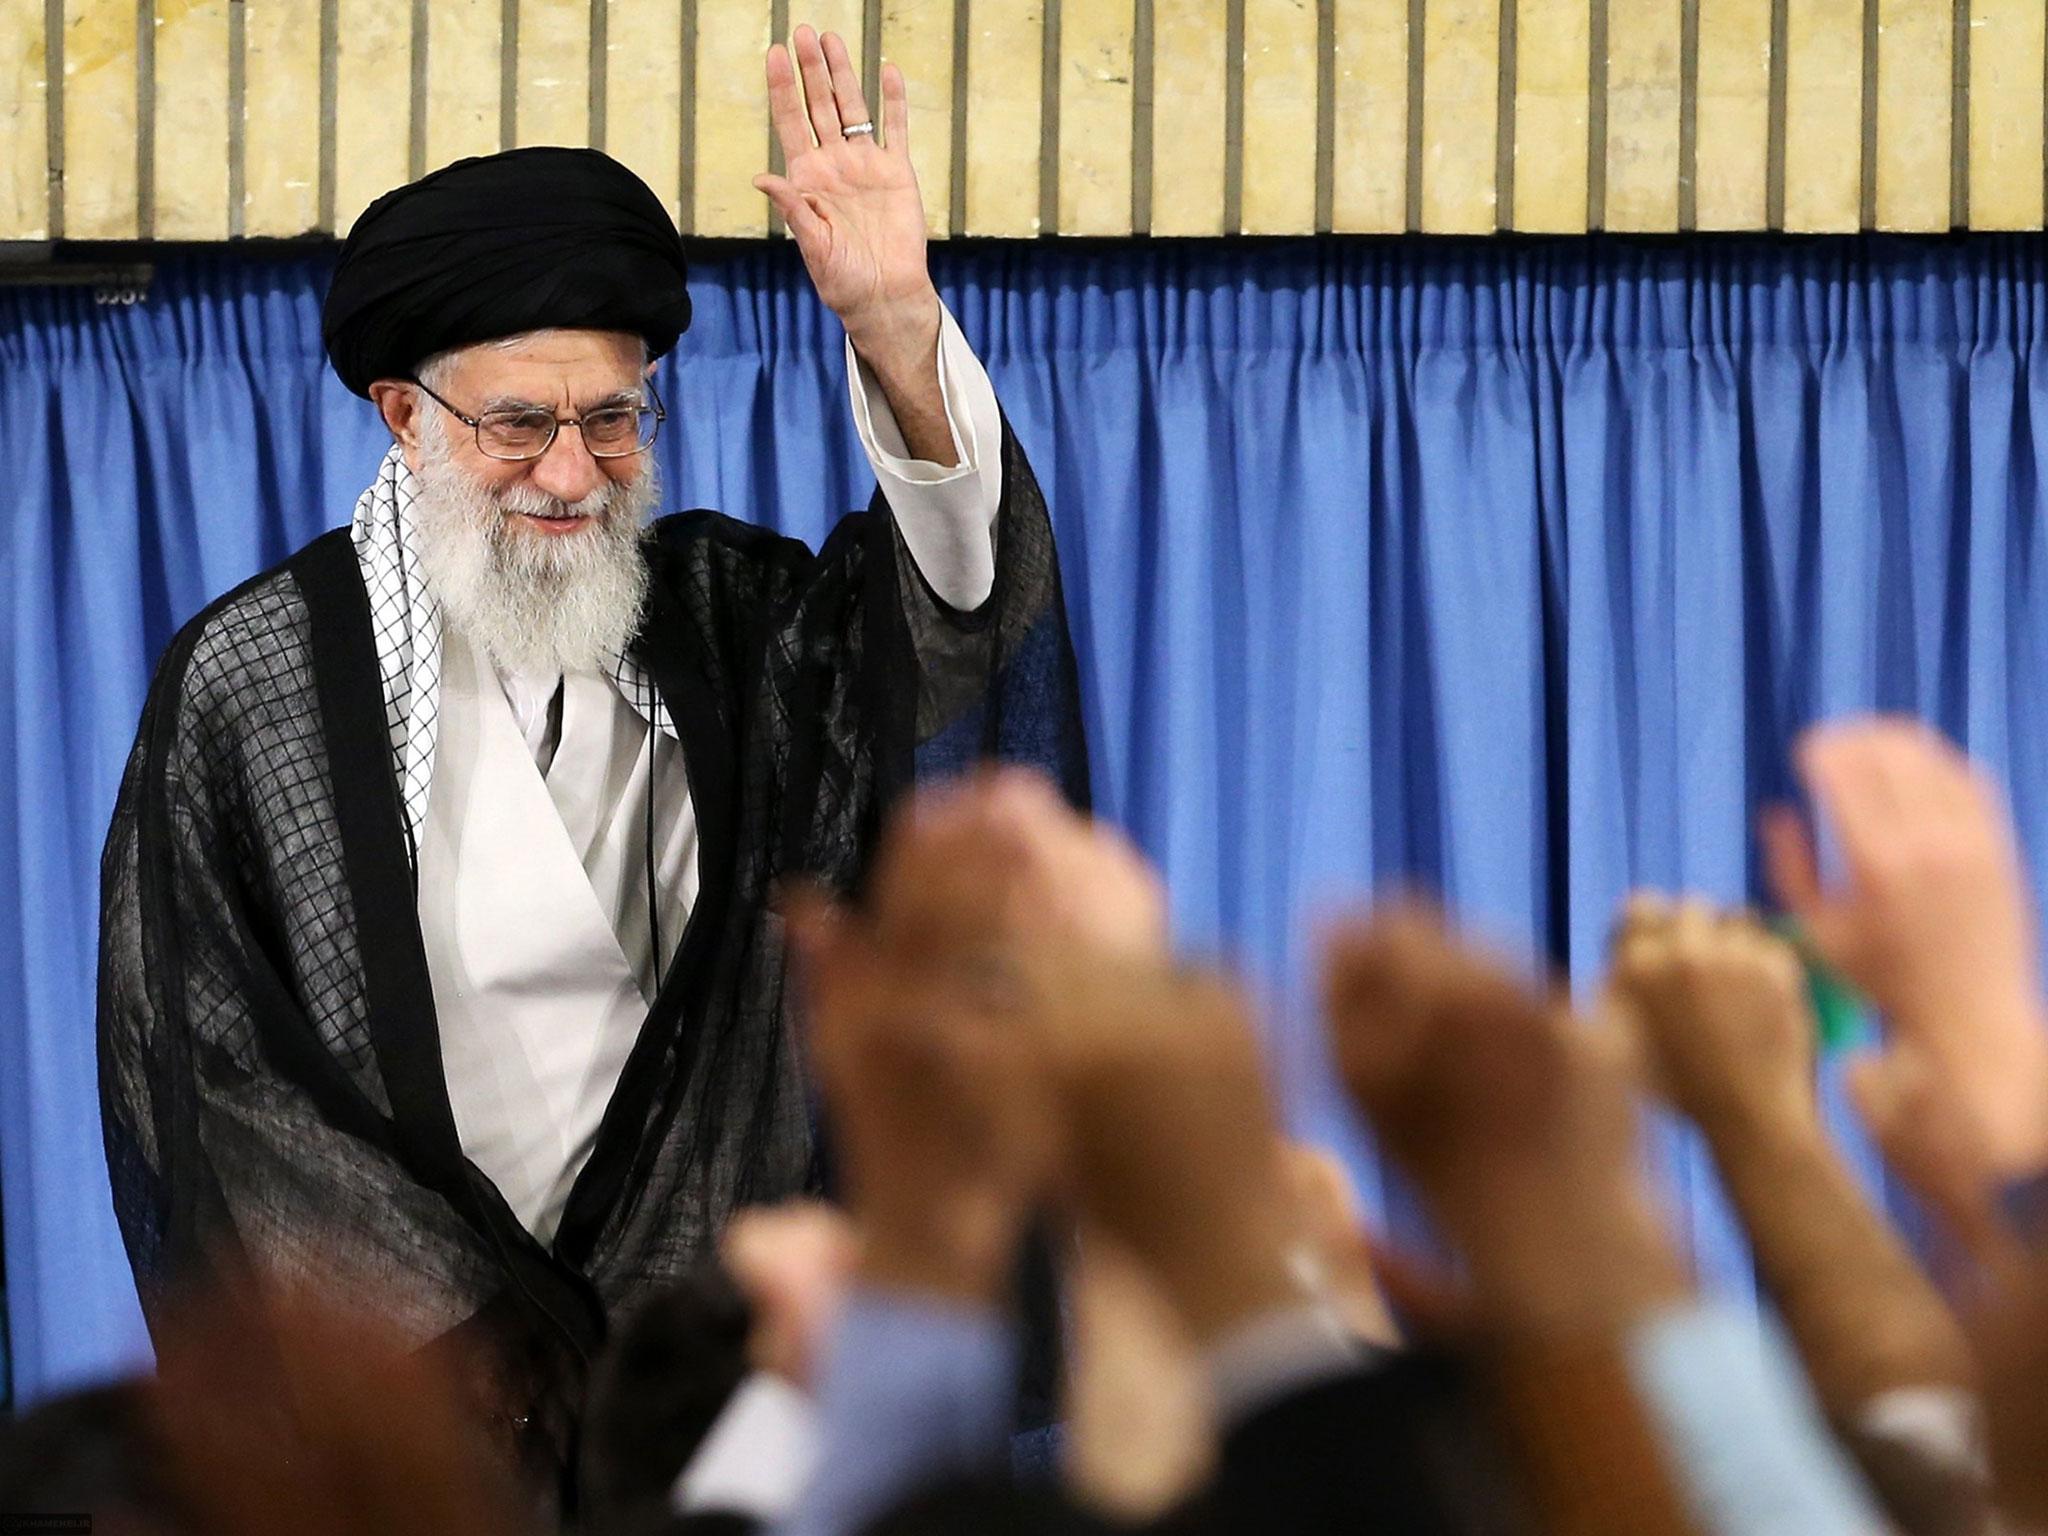 A letter has been sent to Ayatollah Ali Khamenei urging him to address the issue